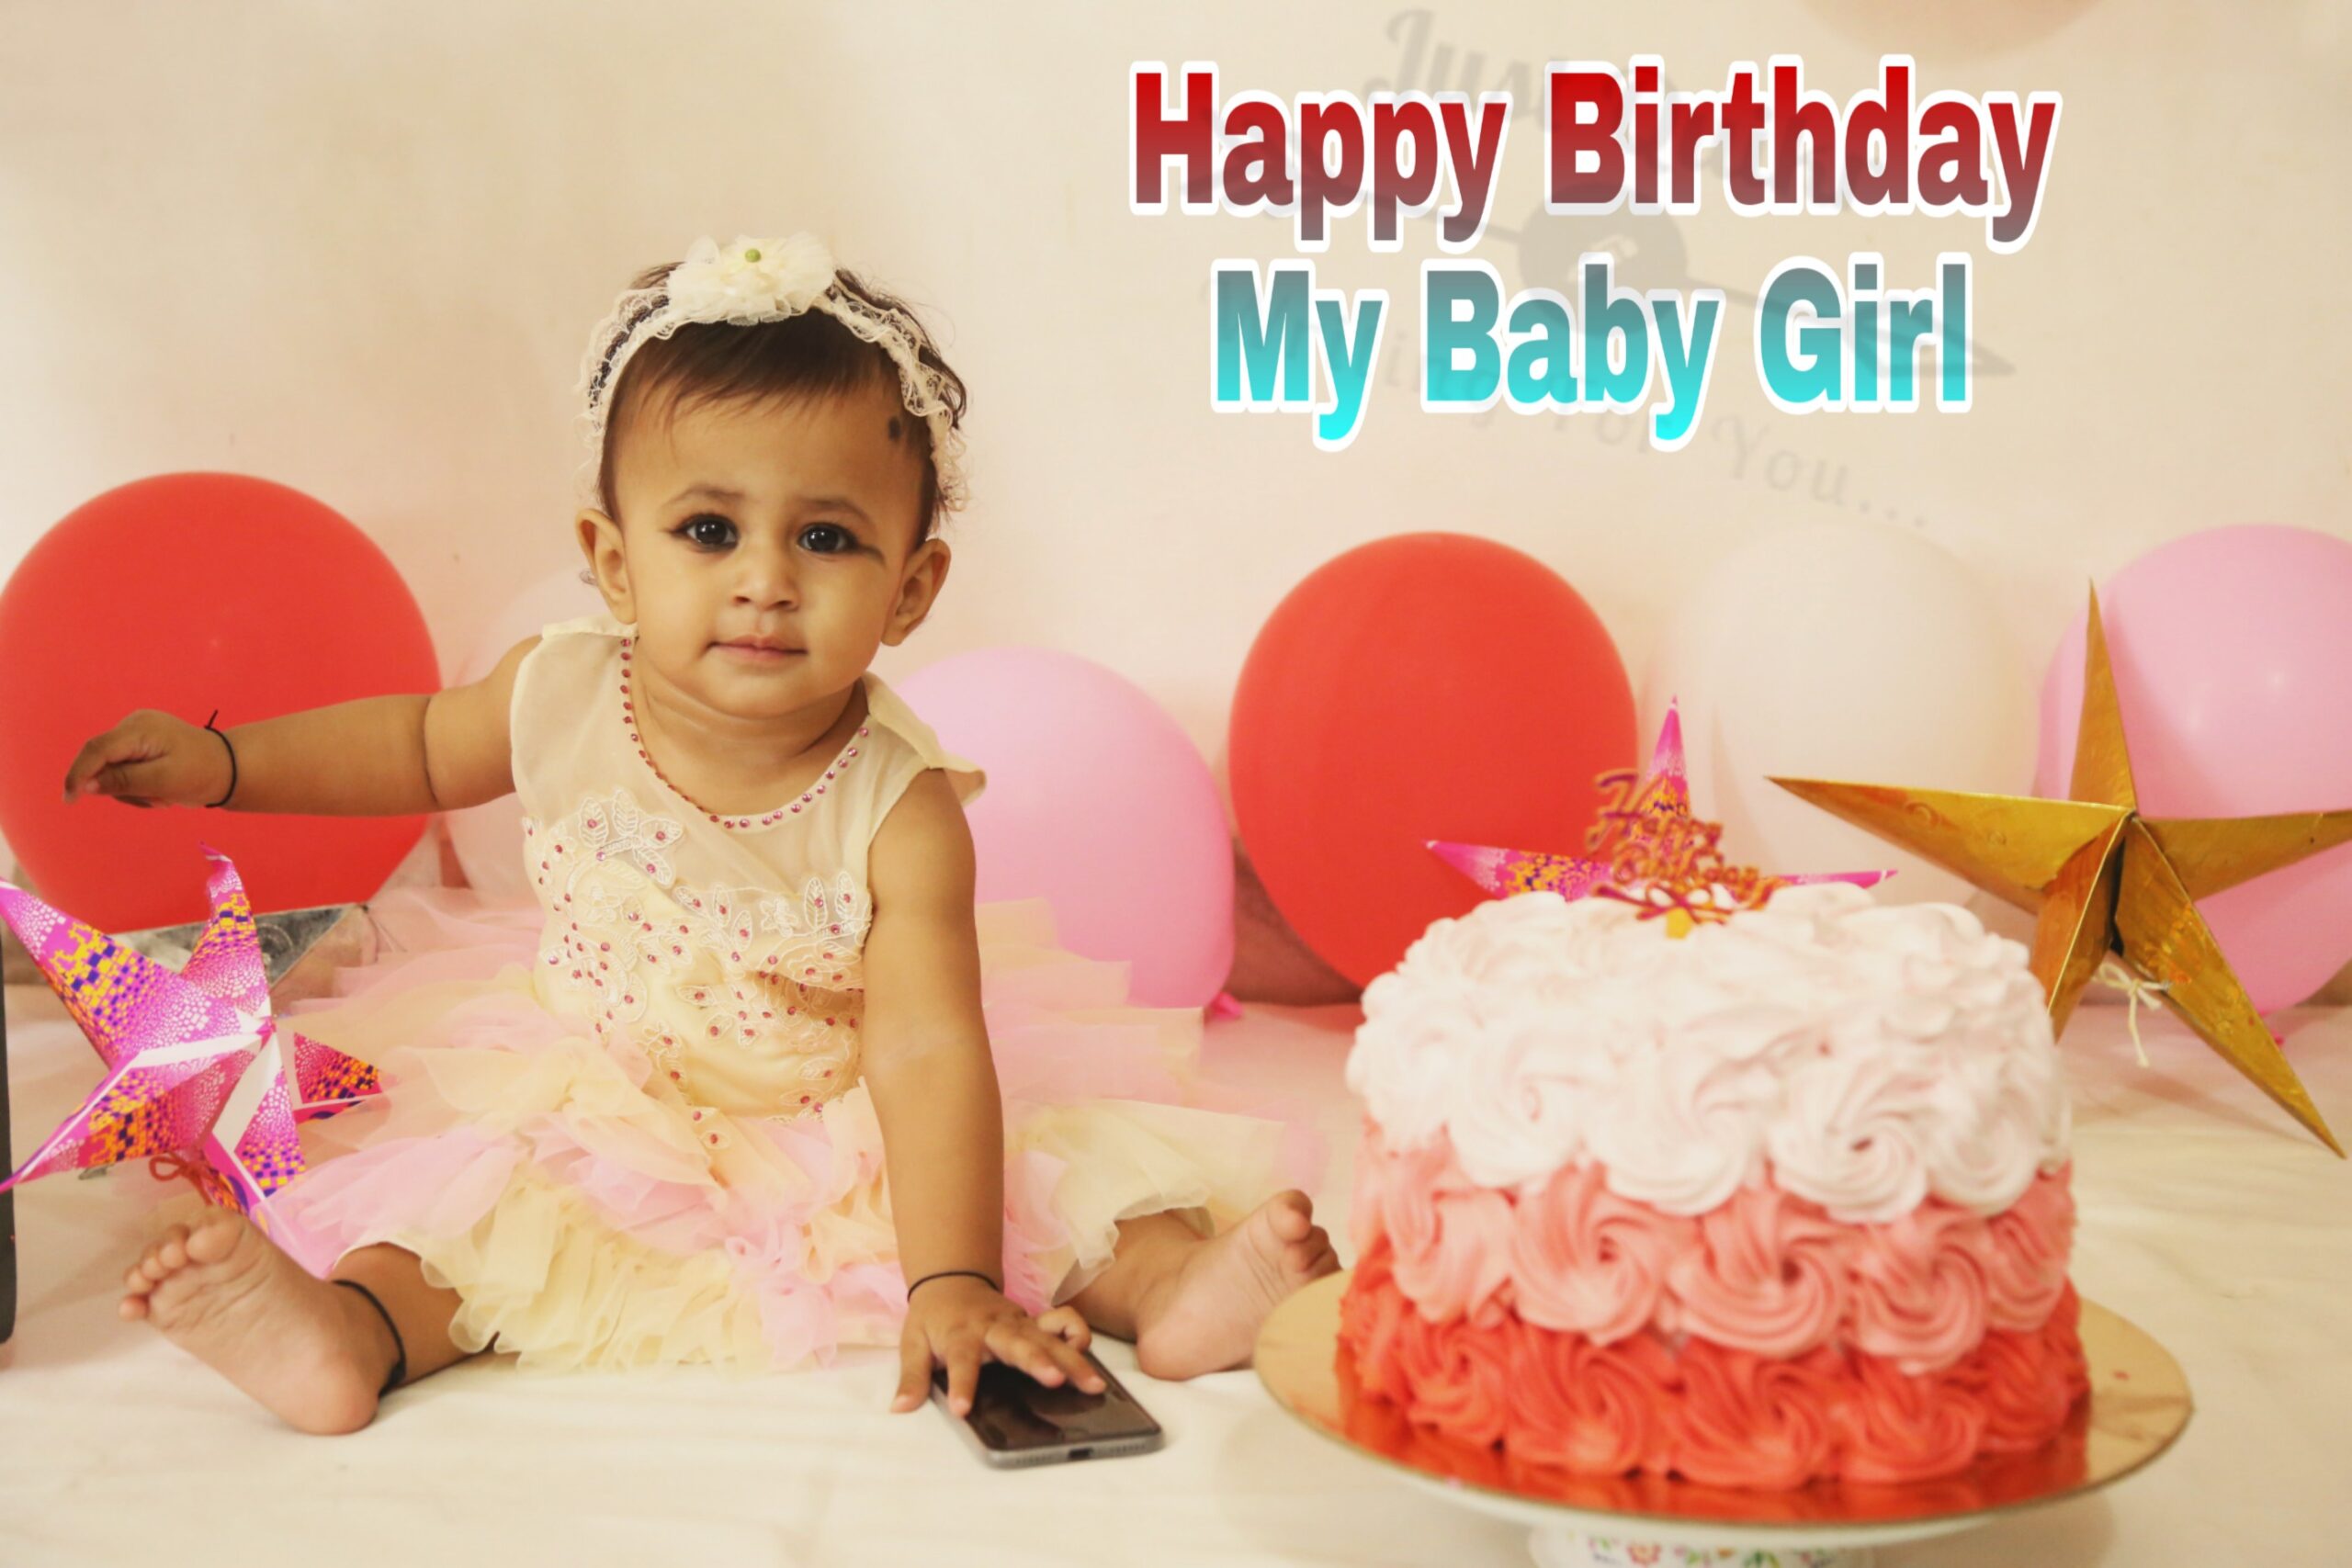 Special Unique Happy Birthday Cake HD Pics Images for Baby Girl